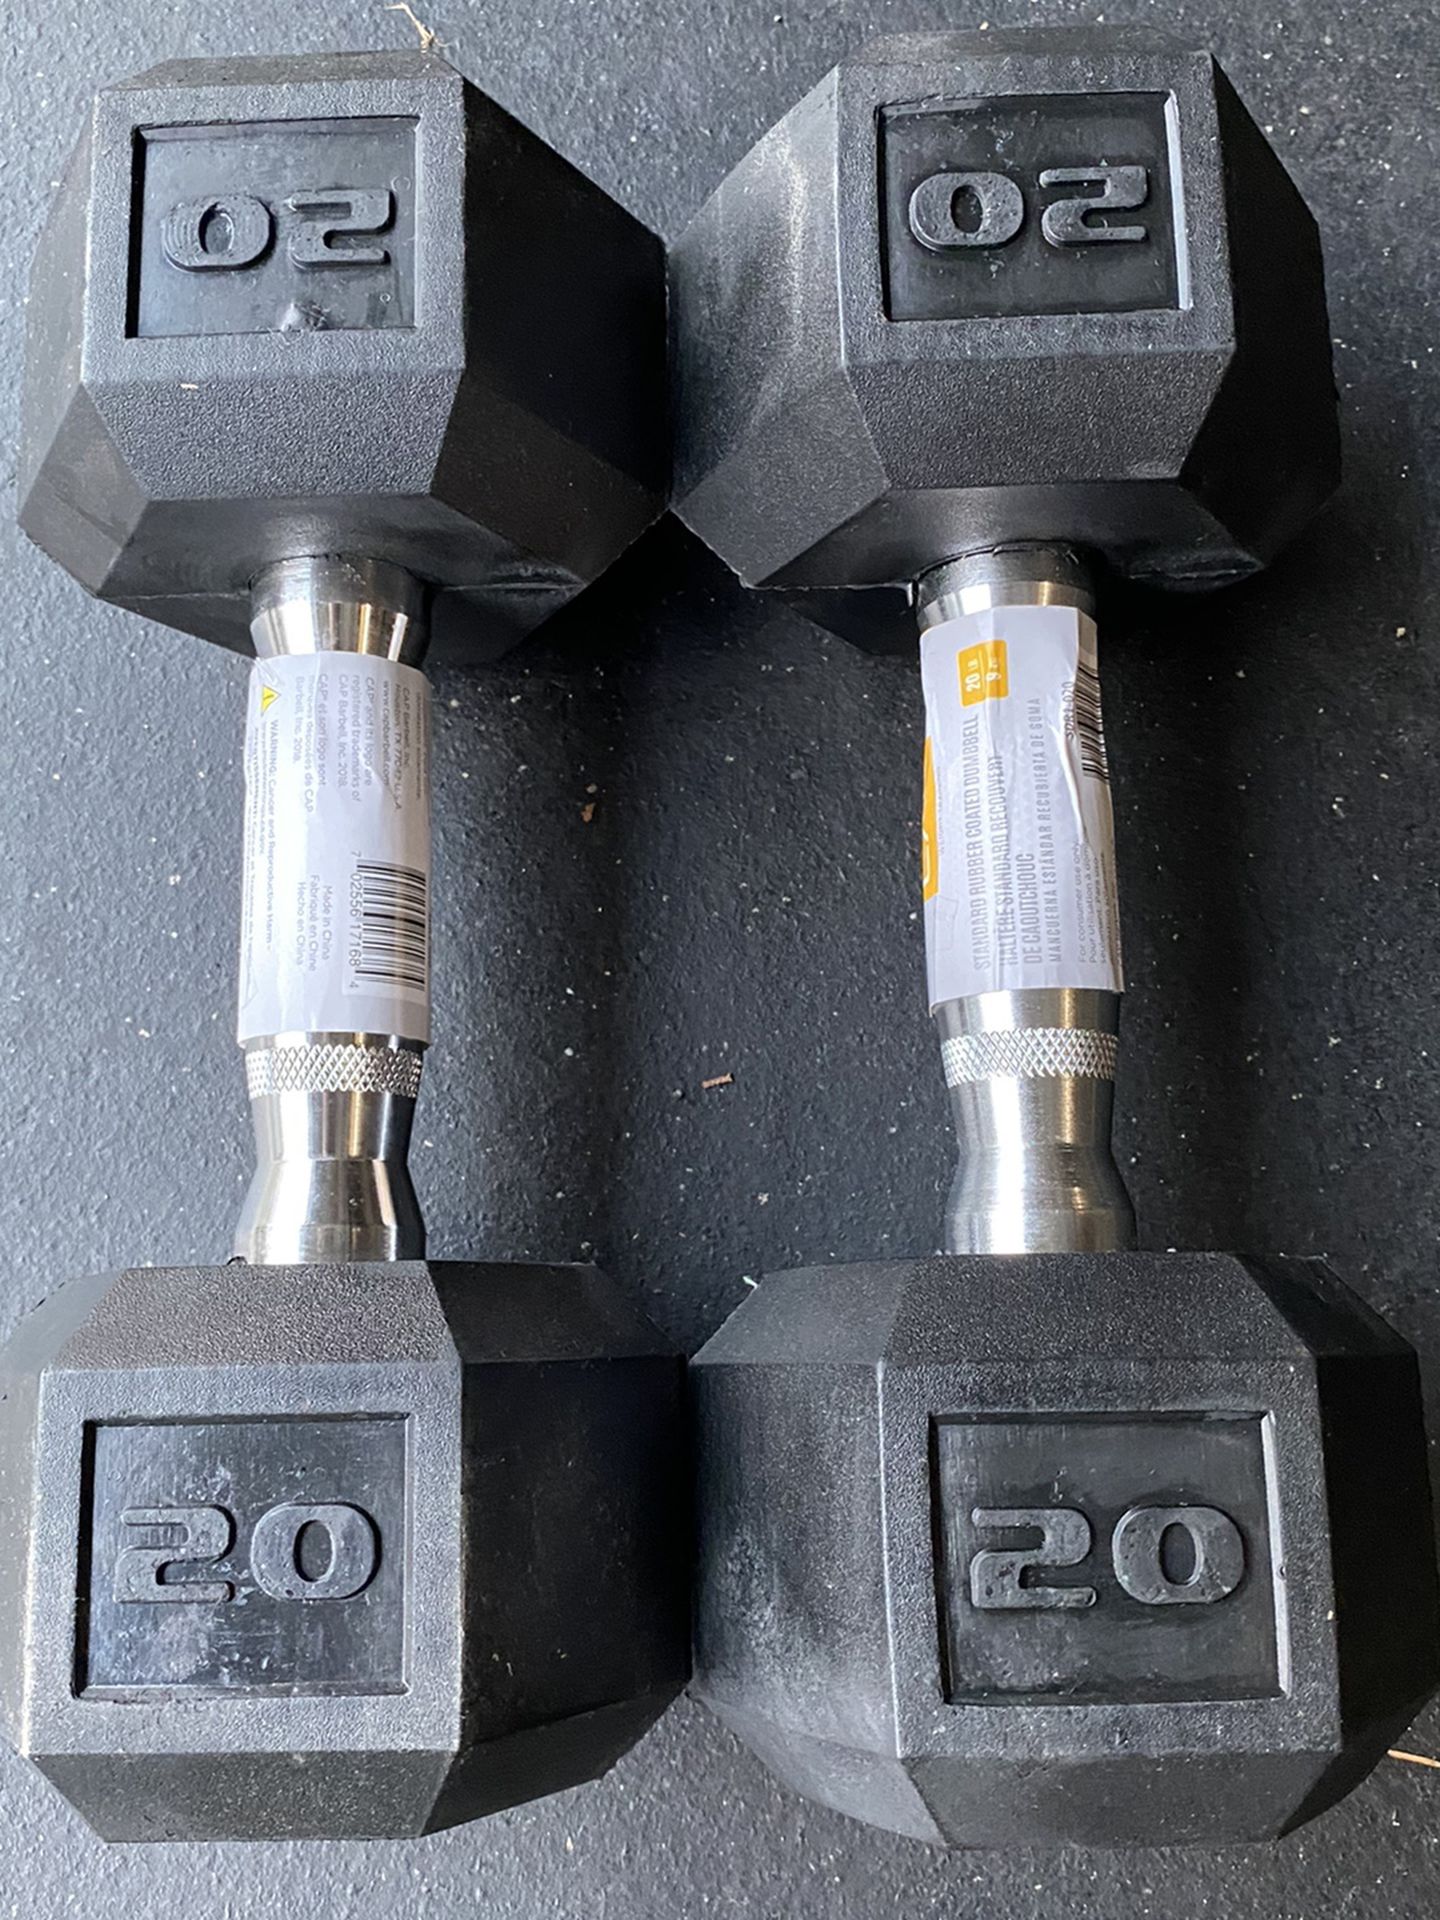 New 20 Lbs Rubber Coated Hex Shaped Dumbbells